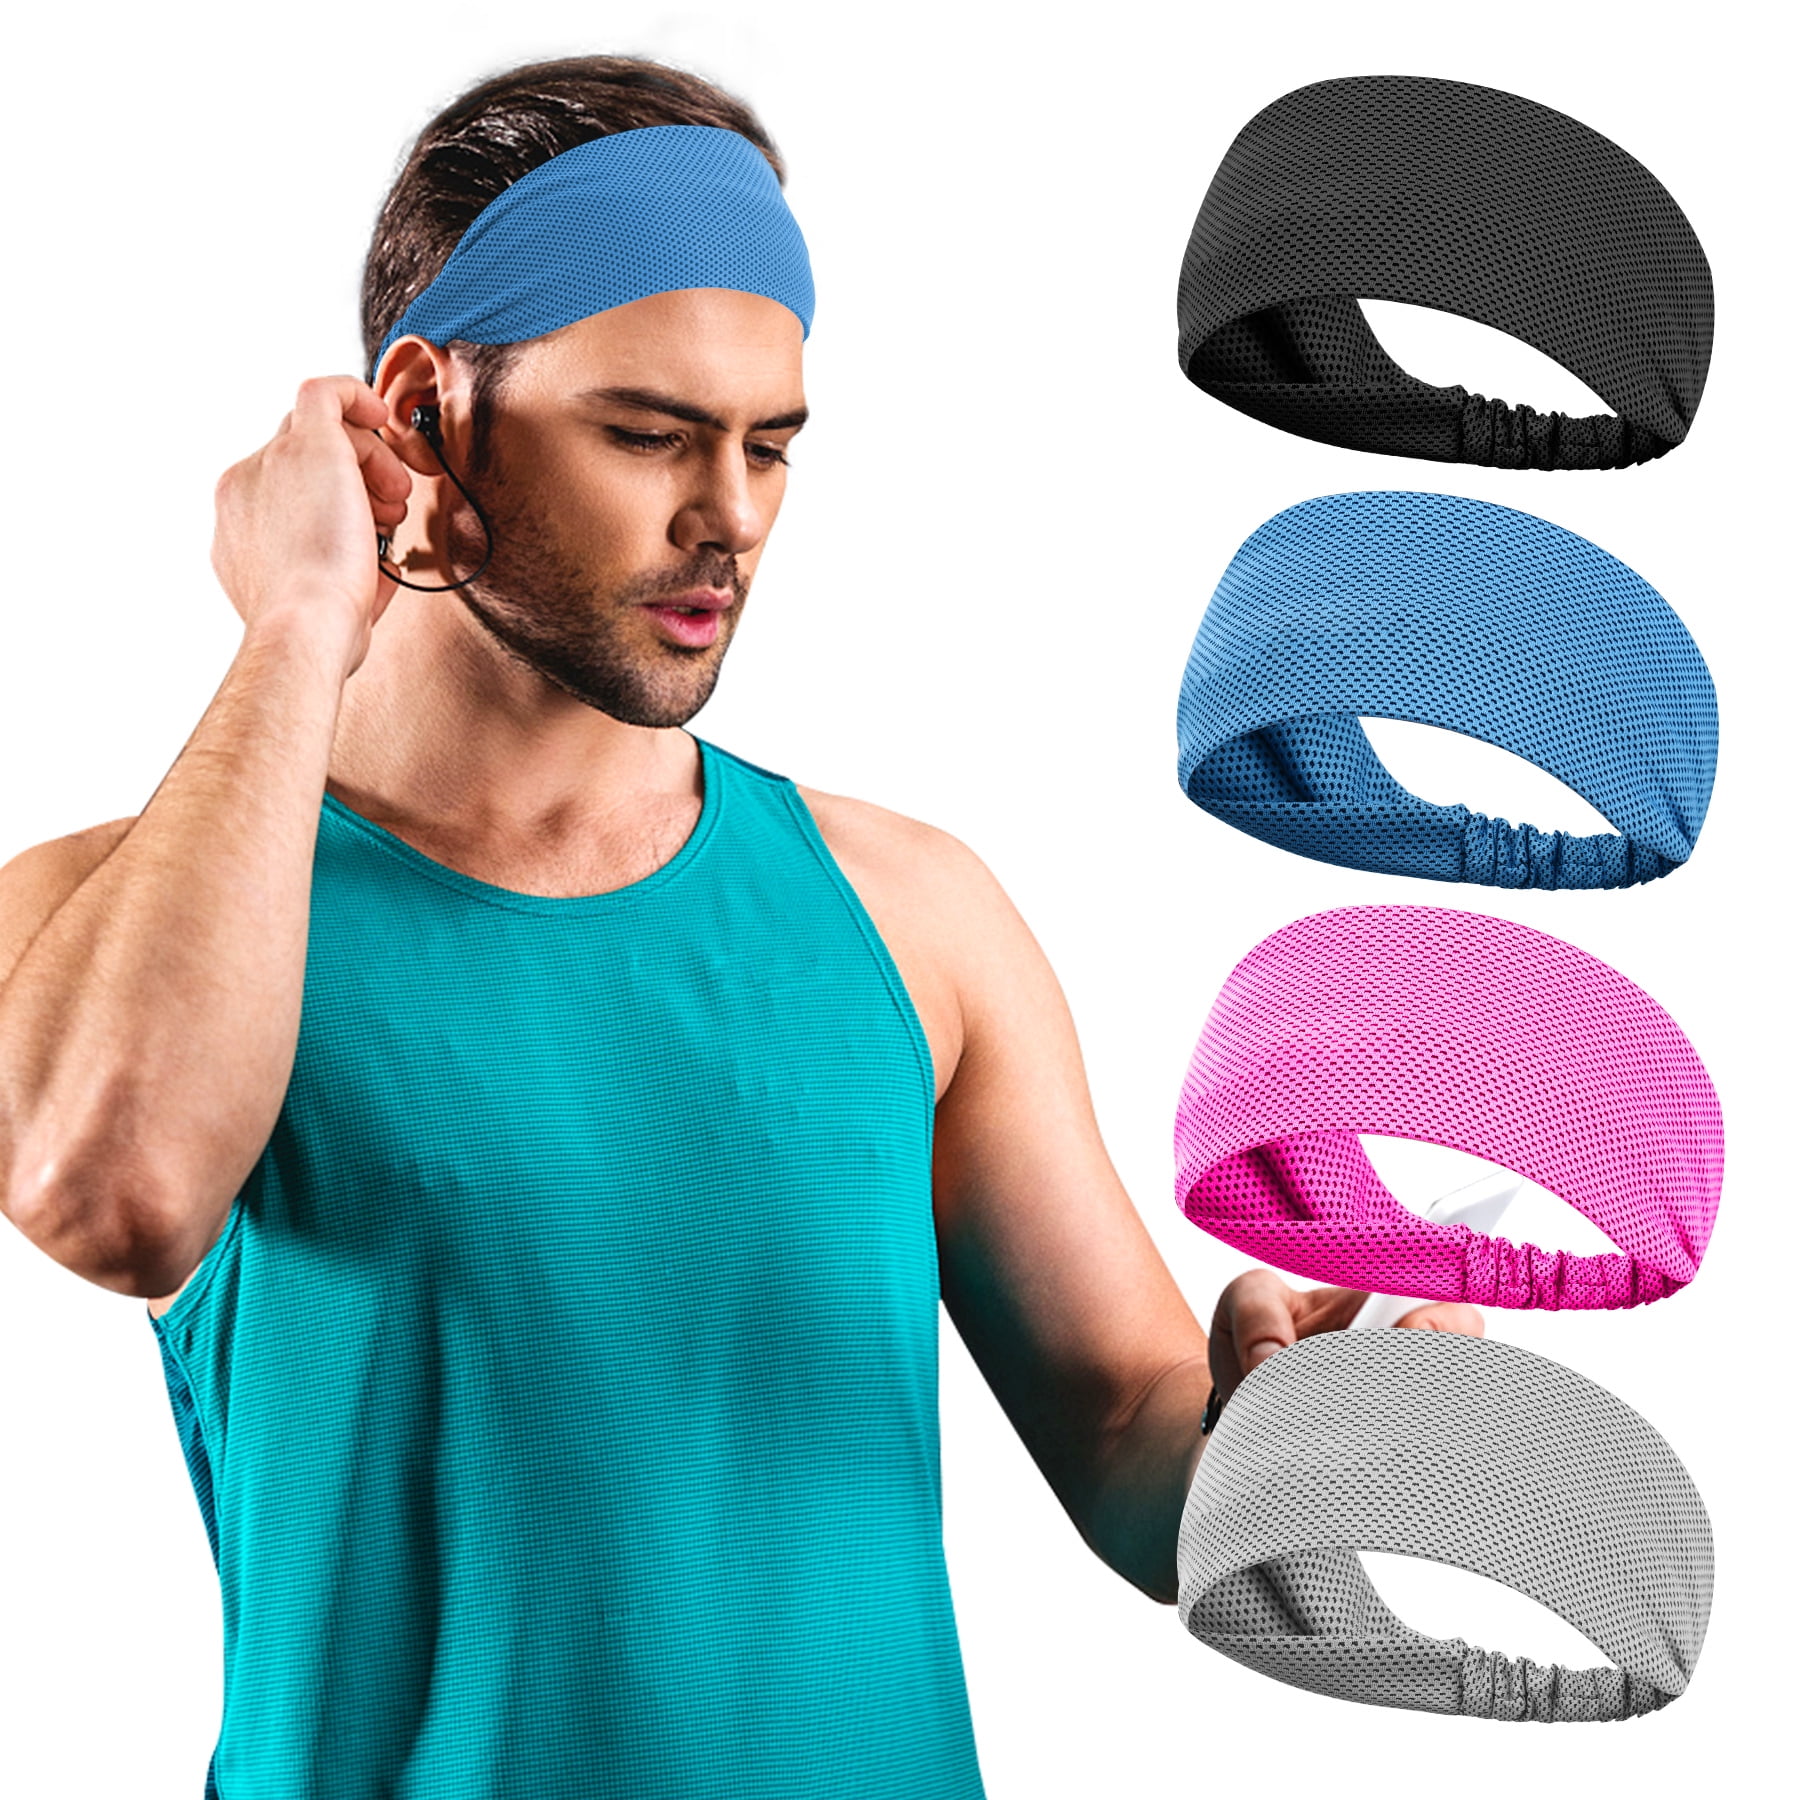 COD+IN STOCK】 1PC Sweat band Cotton Sports Headbands for Men/Women Moisture  Wicking Elastic Hair Bands for Yoga, Gym, Workout, Tennis, Basketball,  Running and Working Outside